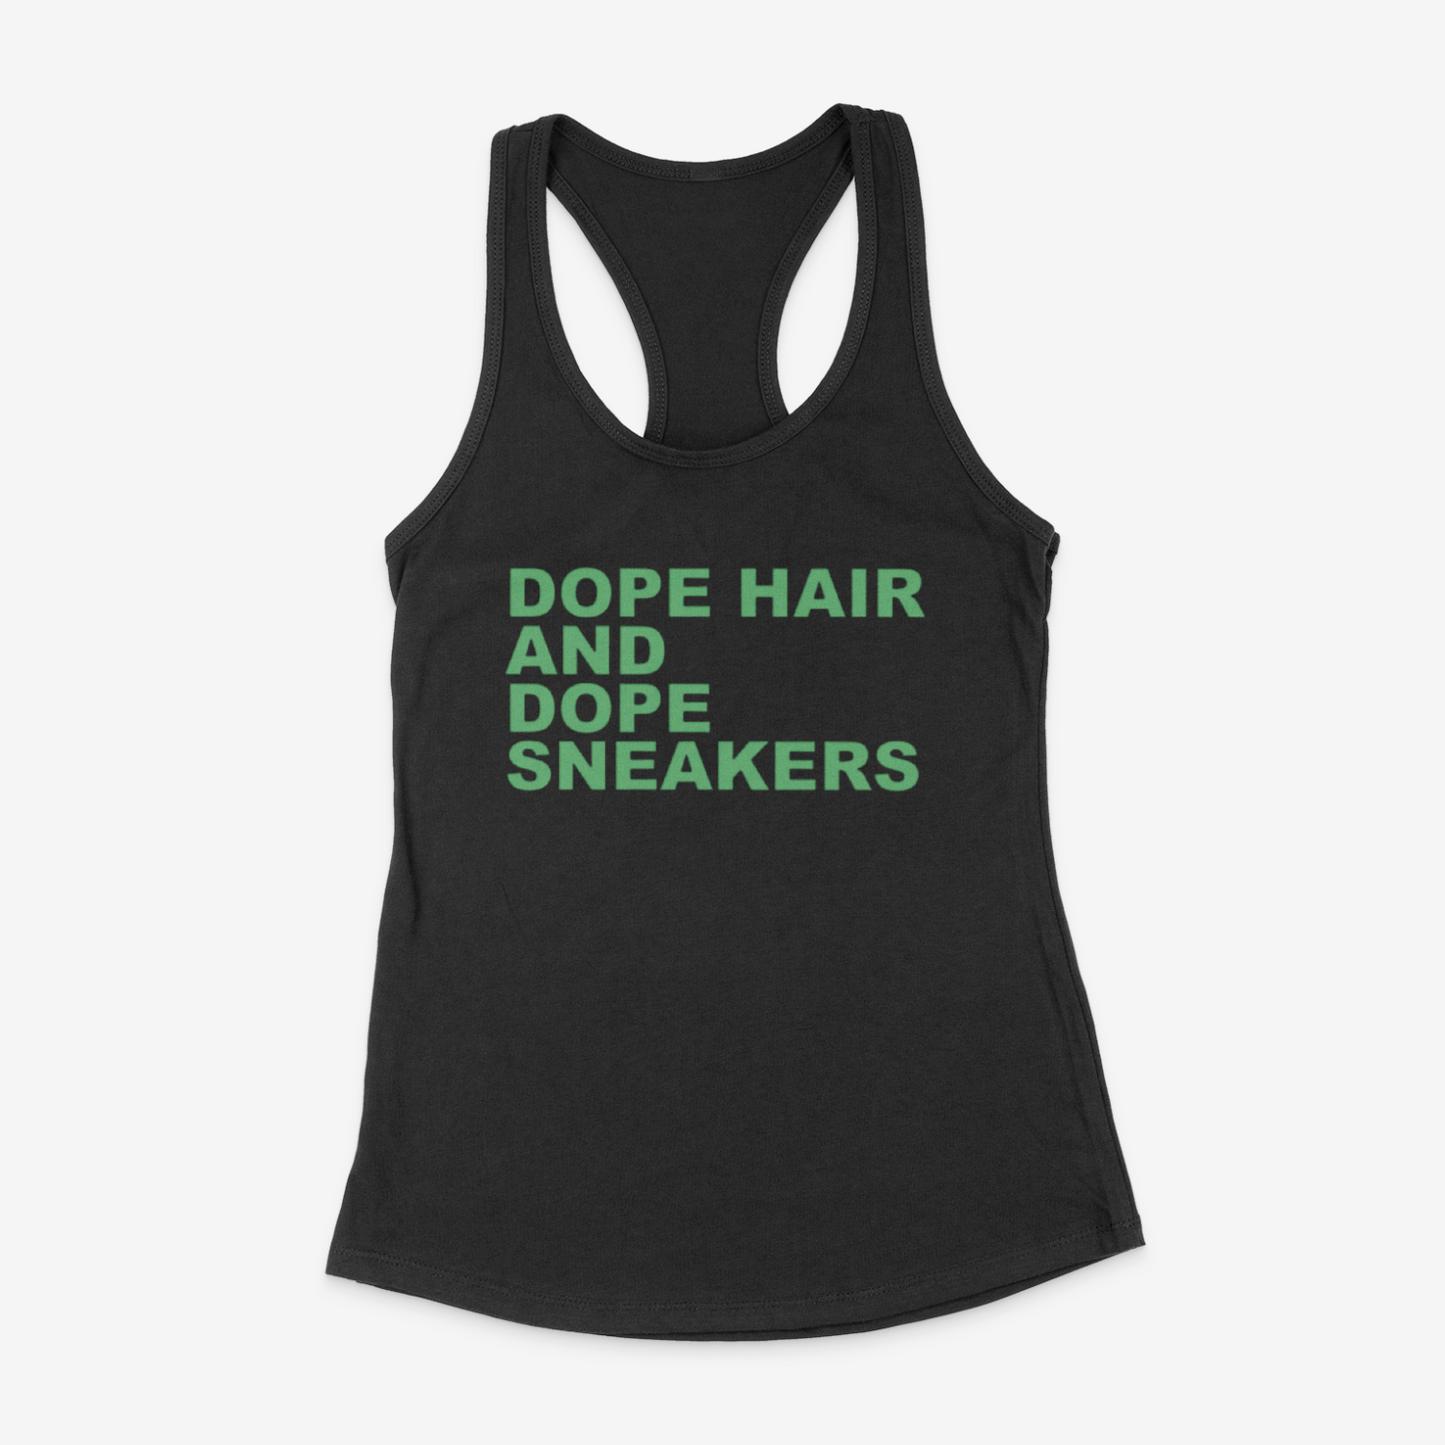 Dope Hair and Dope Sneakers Tank Top (Green)